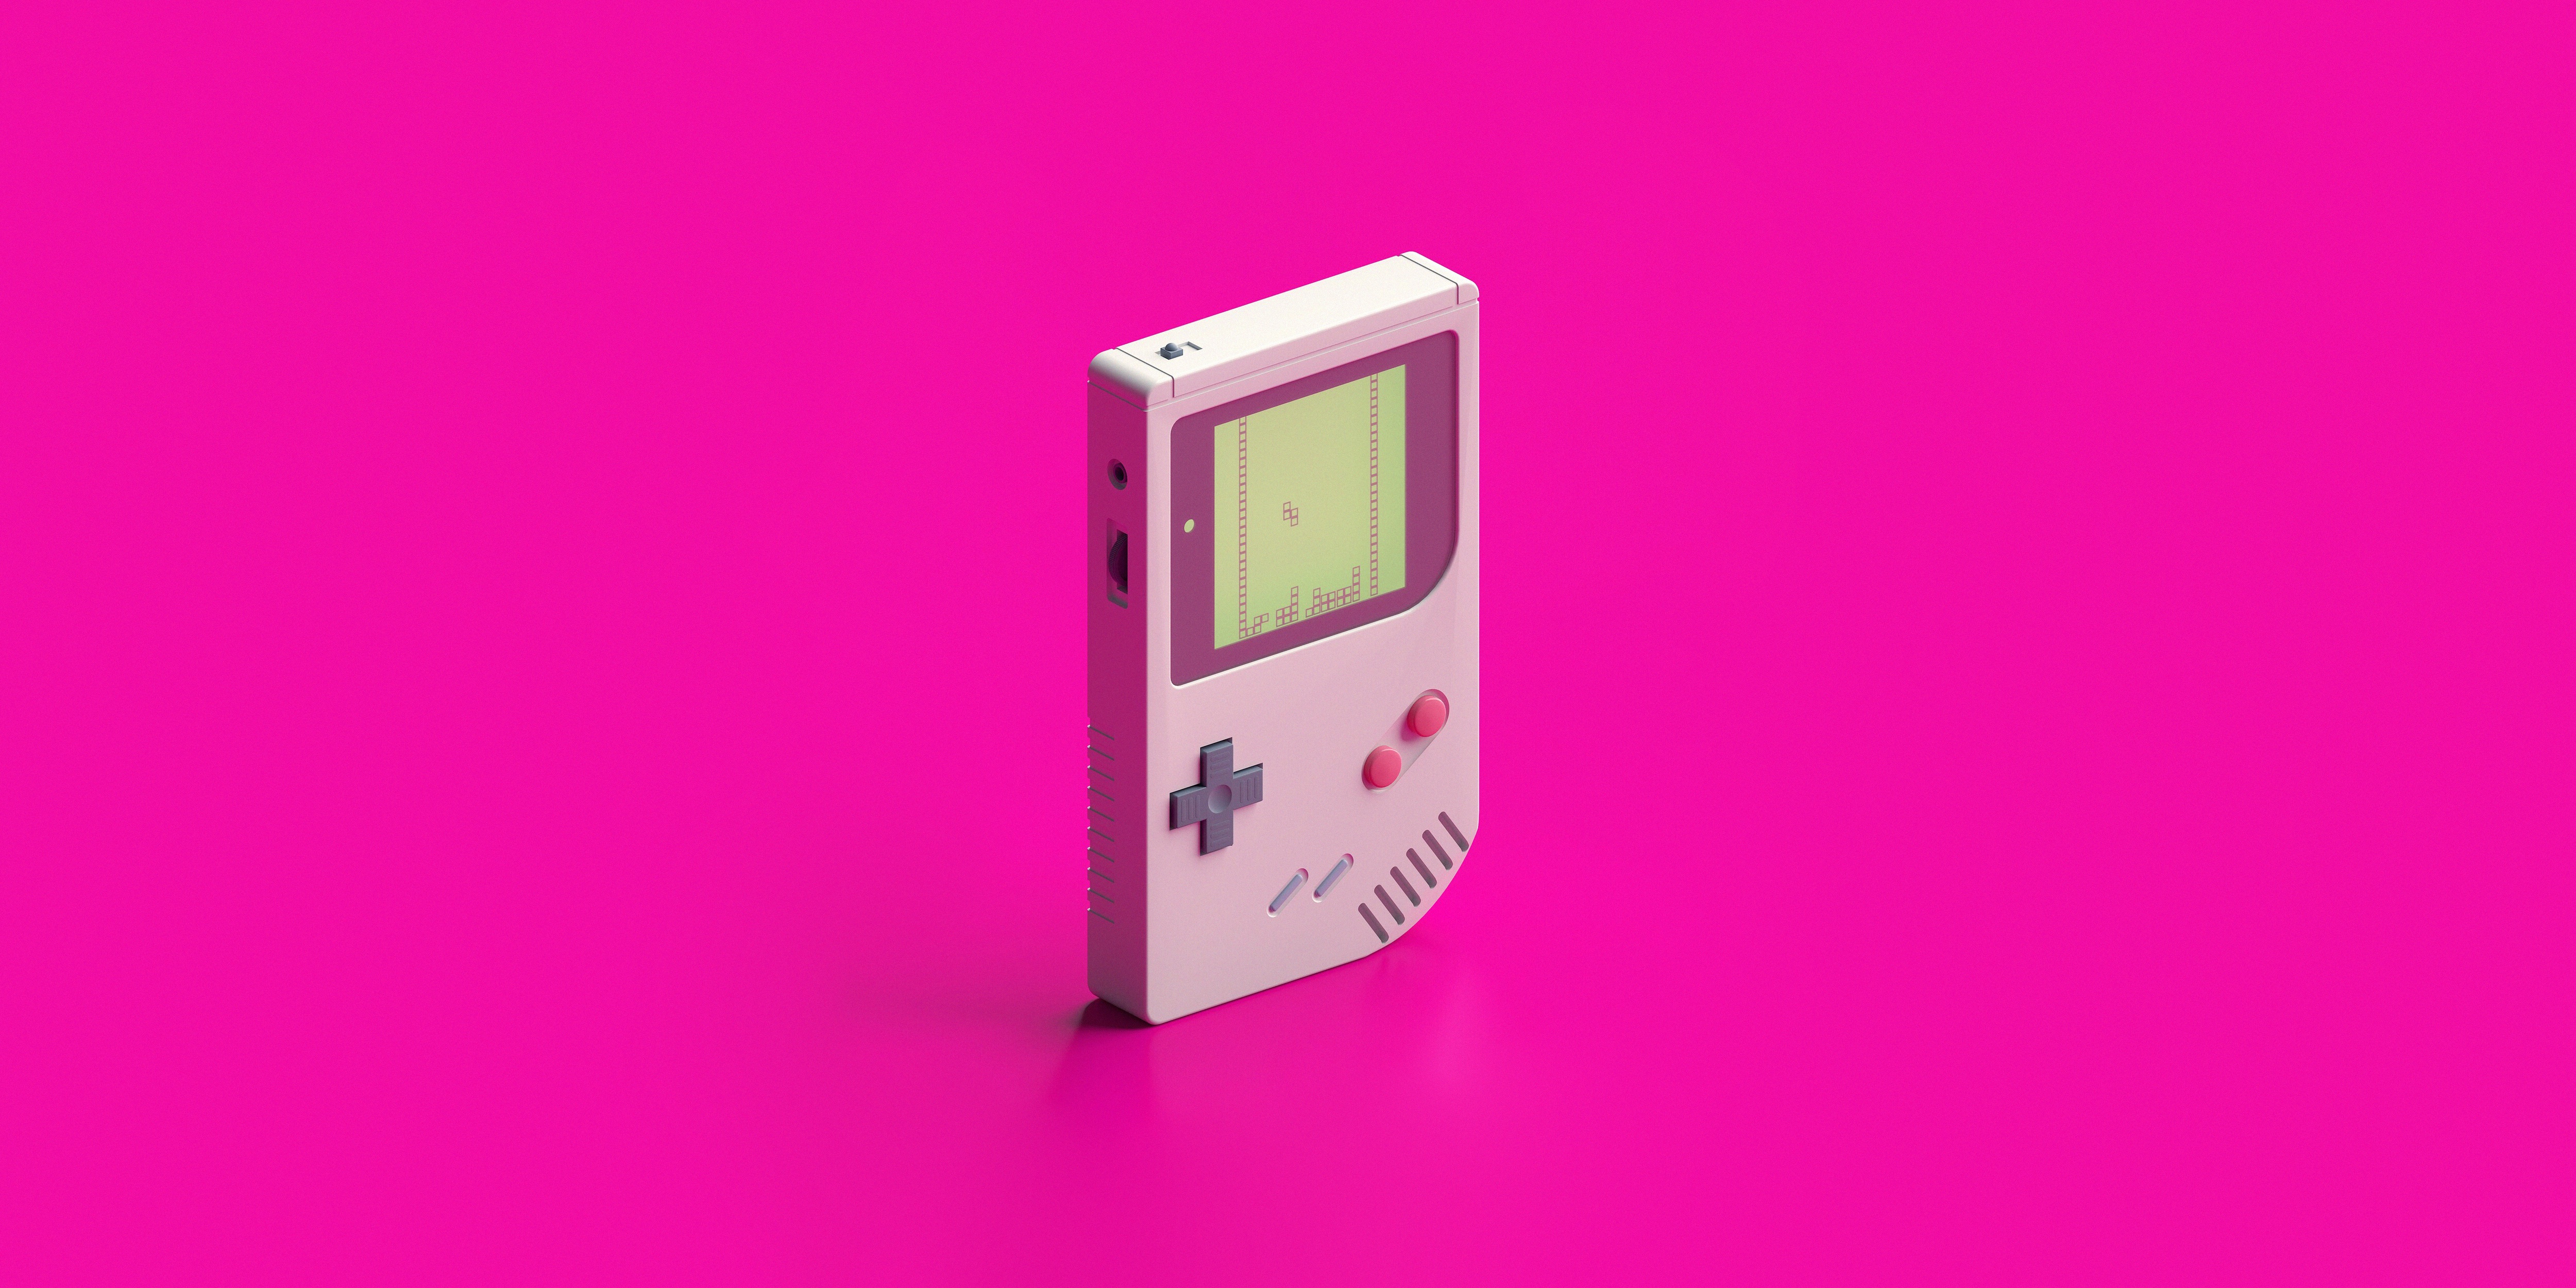 Simple Background Pink Background Retro Games Video Games GameBoy Nintendo Pink 5000x2500